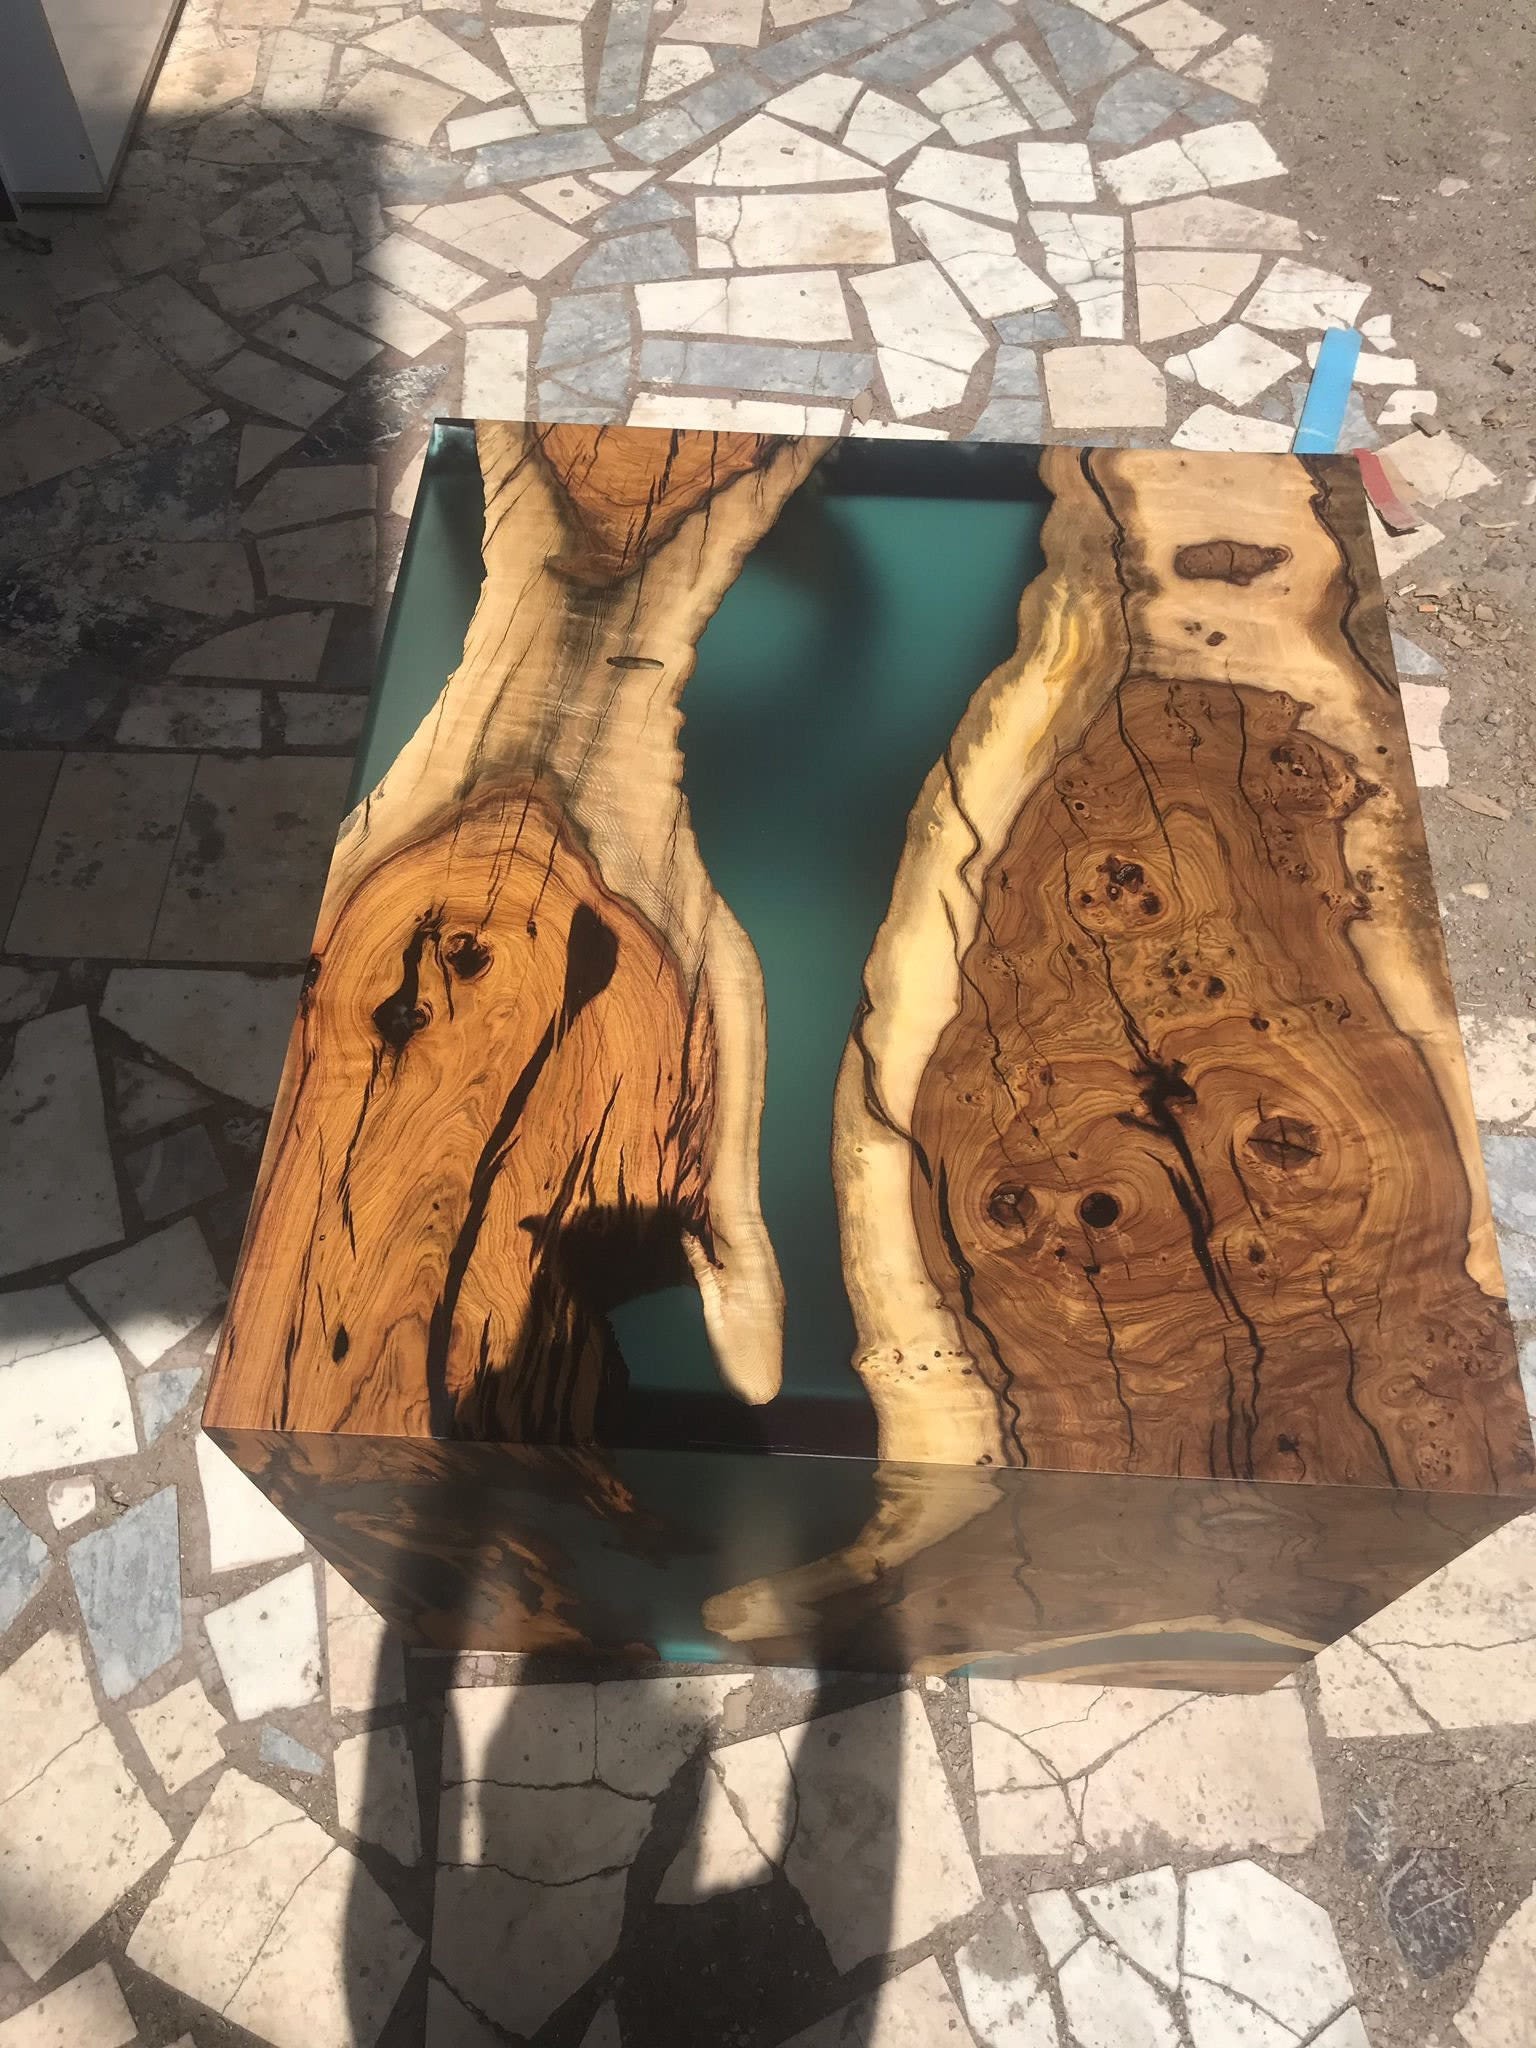 Waterfall Resin Table, Waterfall Coffee Table, Coffee Table by Tinella Wood